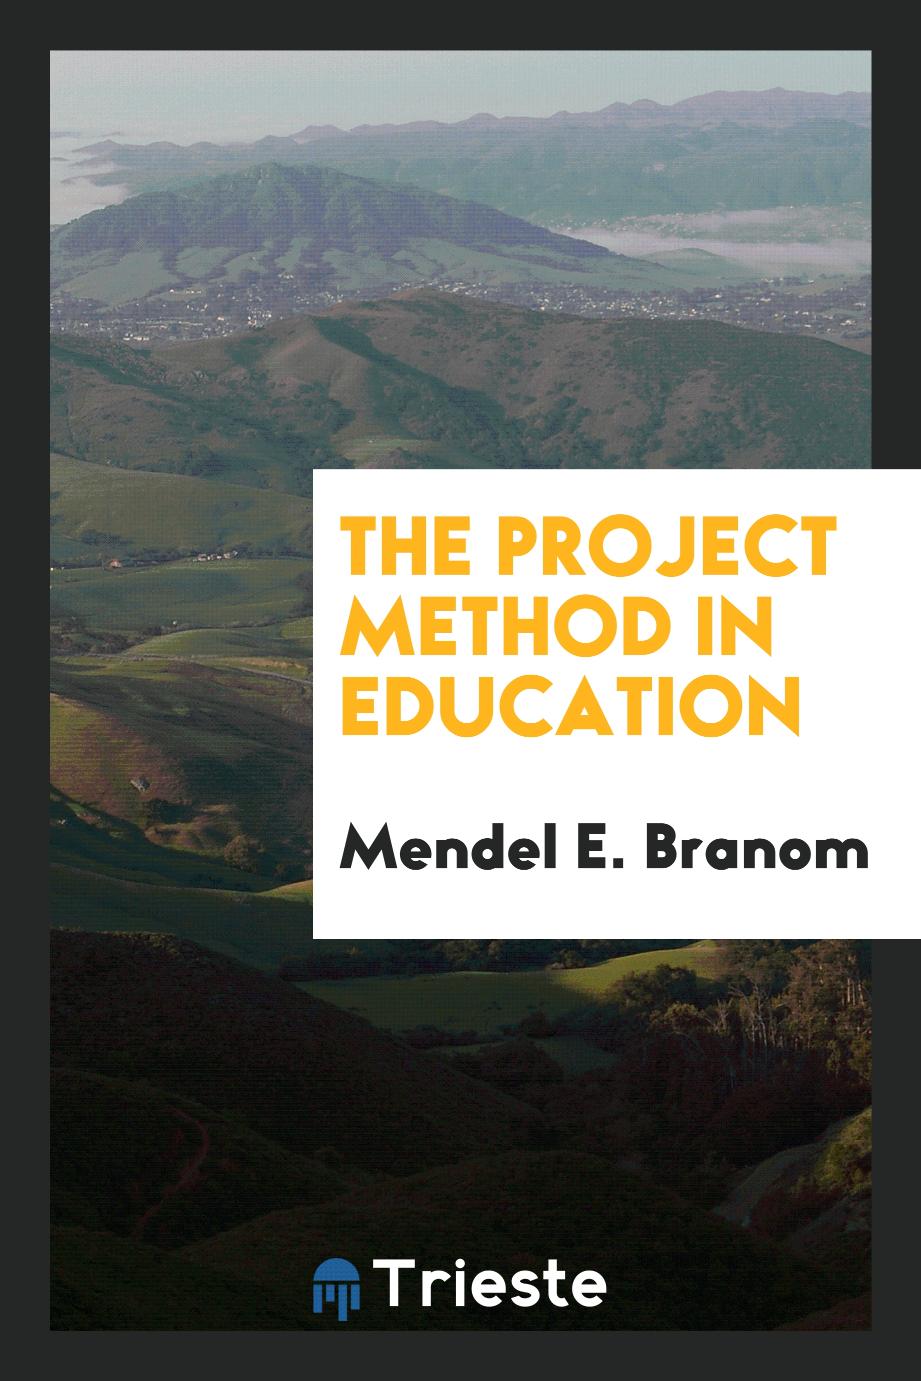 The project method in education